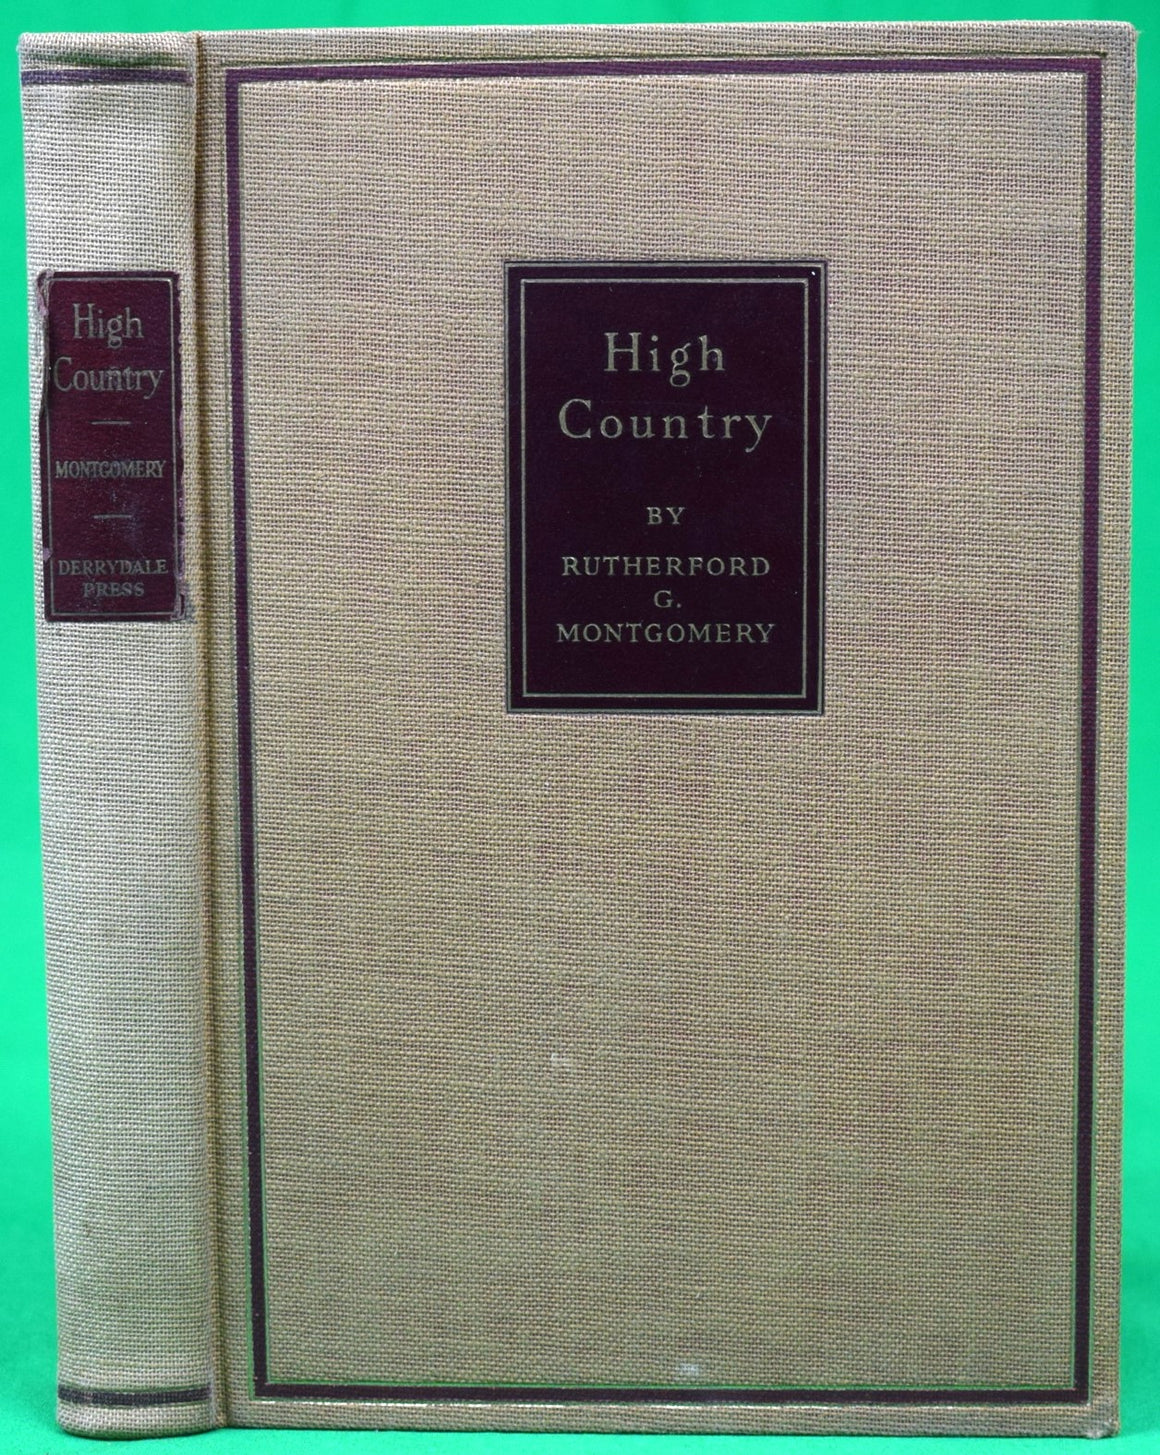 "High Country" 1938 MONTGOMERY, Rutherford G.